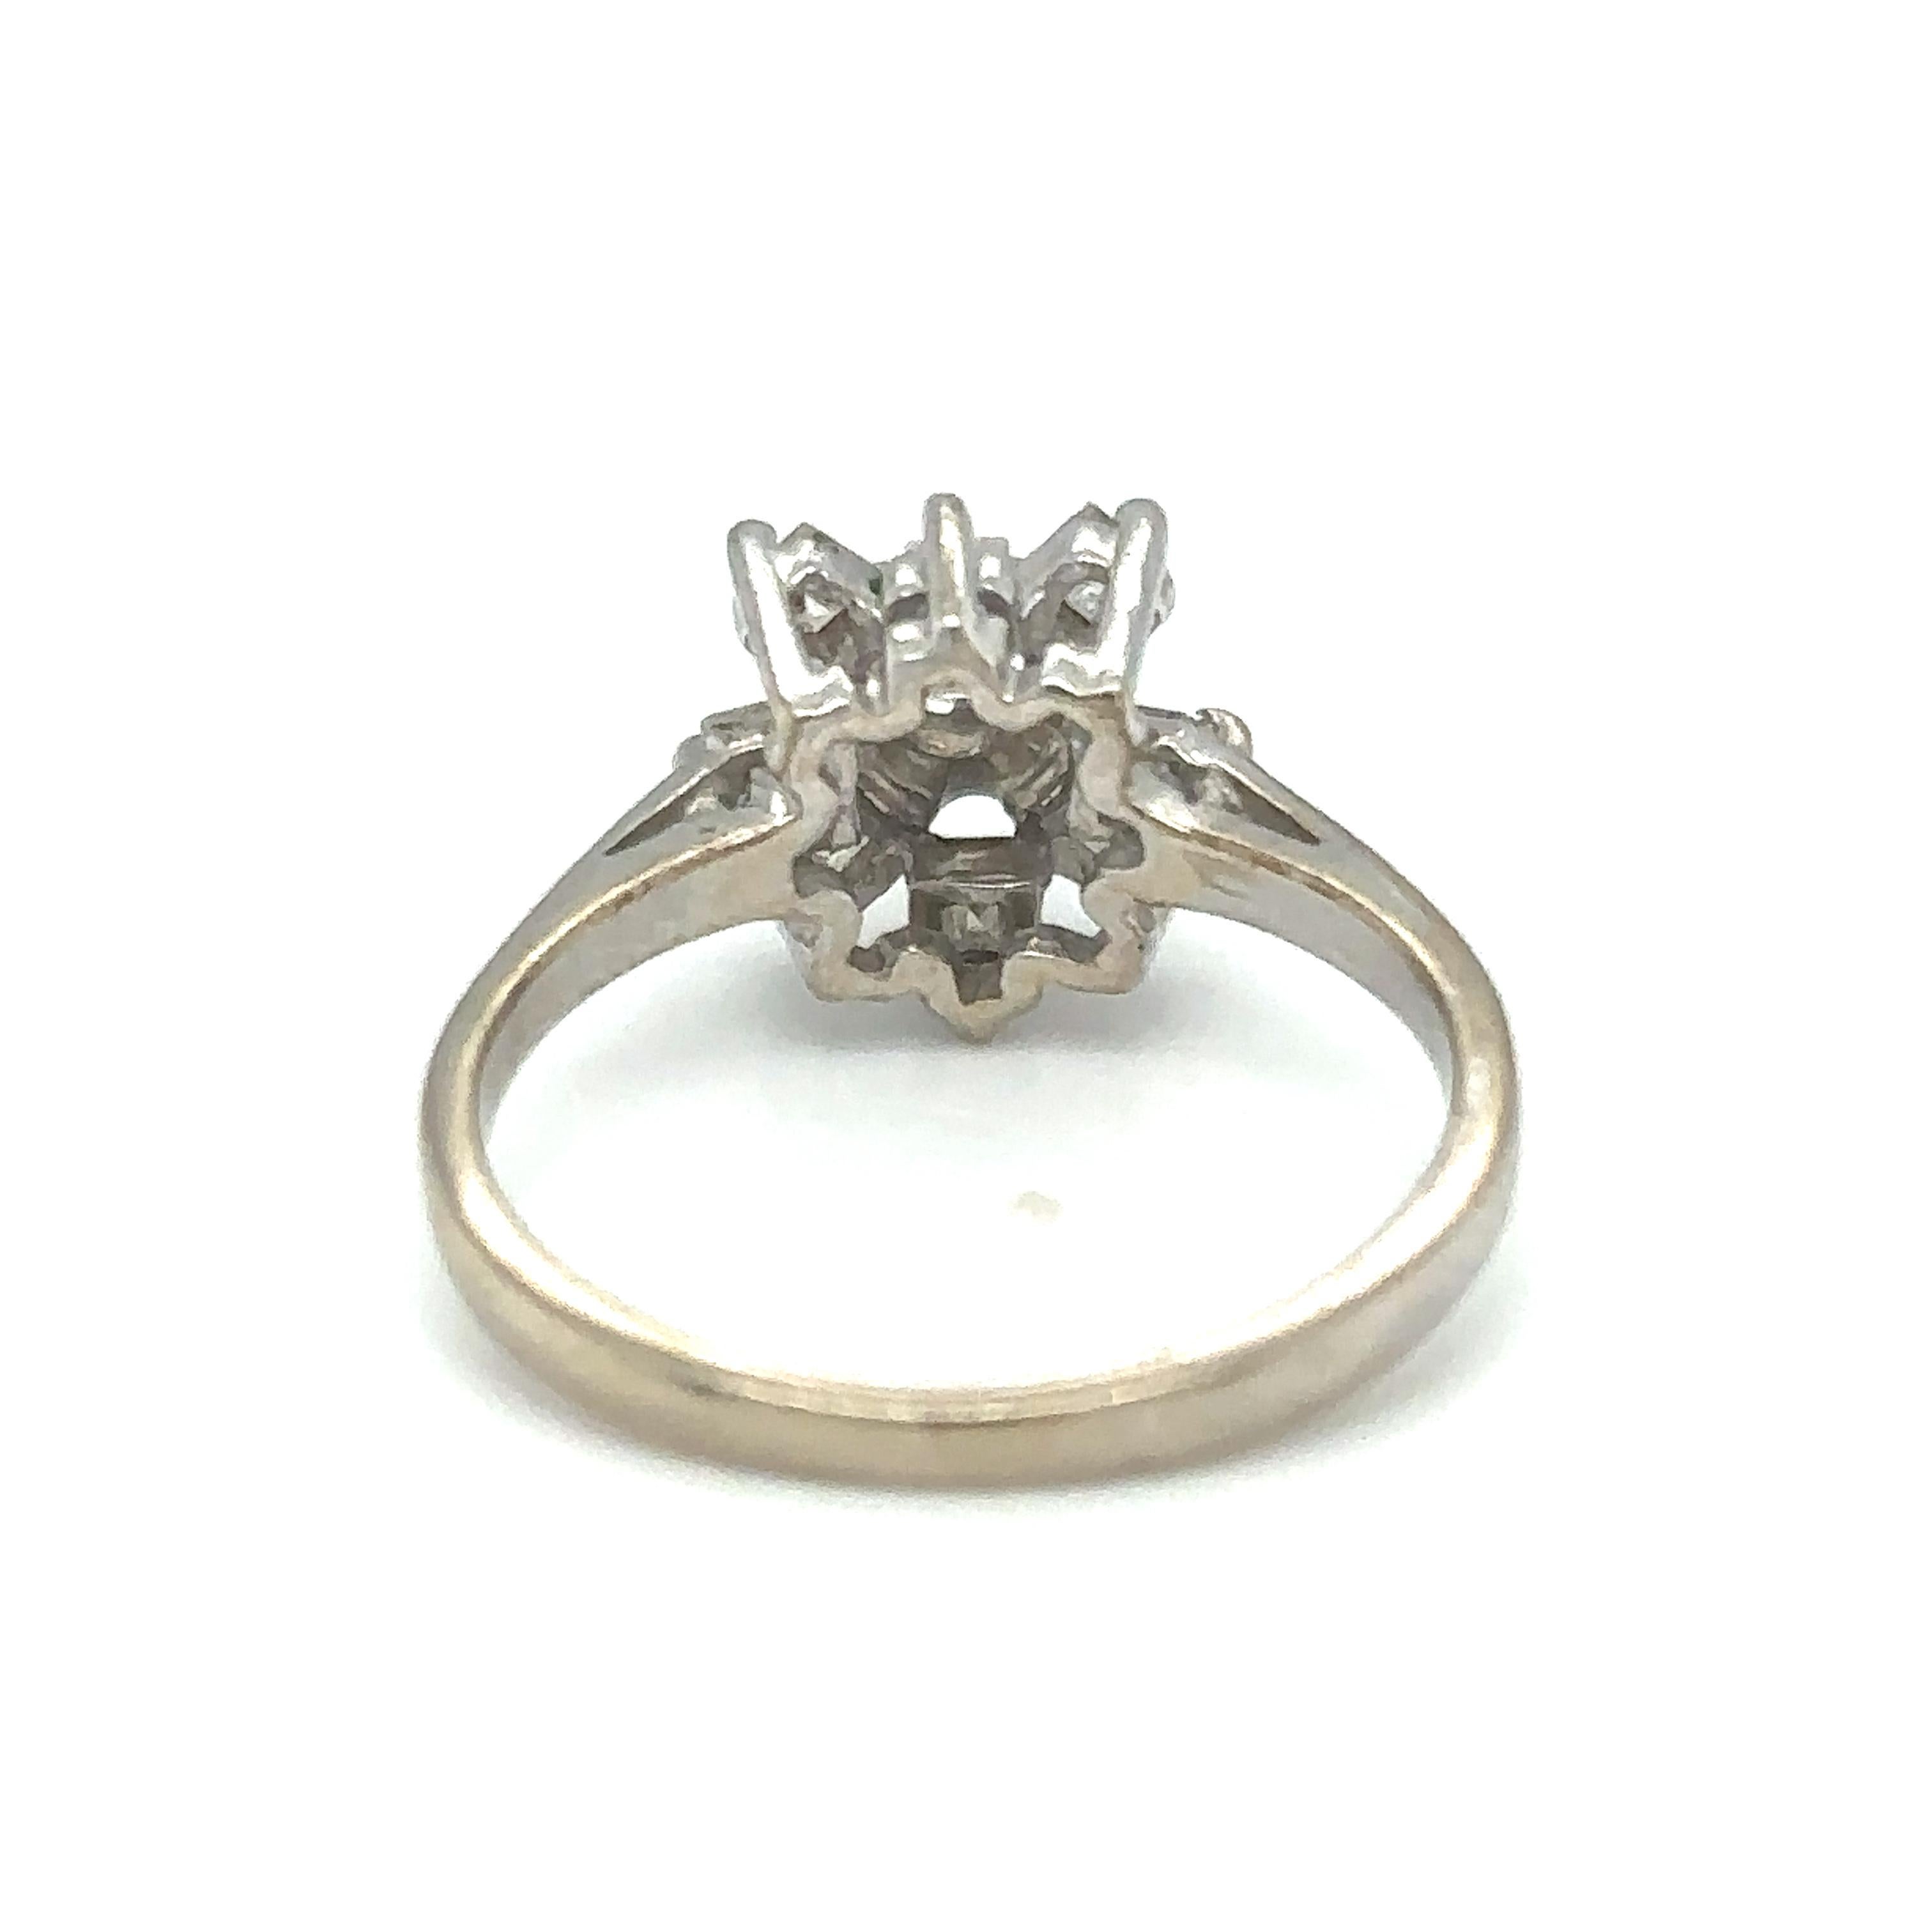 Item Details: This snowflake style ring has carre cut diamonds and originates from Italy. It has a beautiful snowflake design visible from the top gallery. All diamonds are prong set. 

Circa: 2000s
Metal Type: 18 Karat White Gold
Weight: 2.6